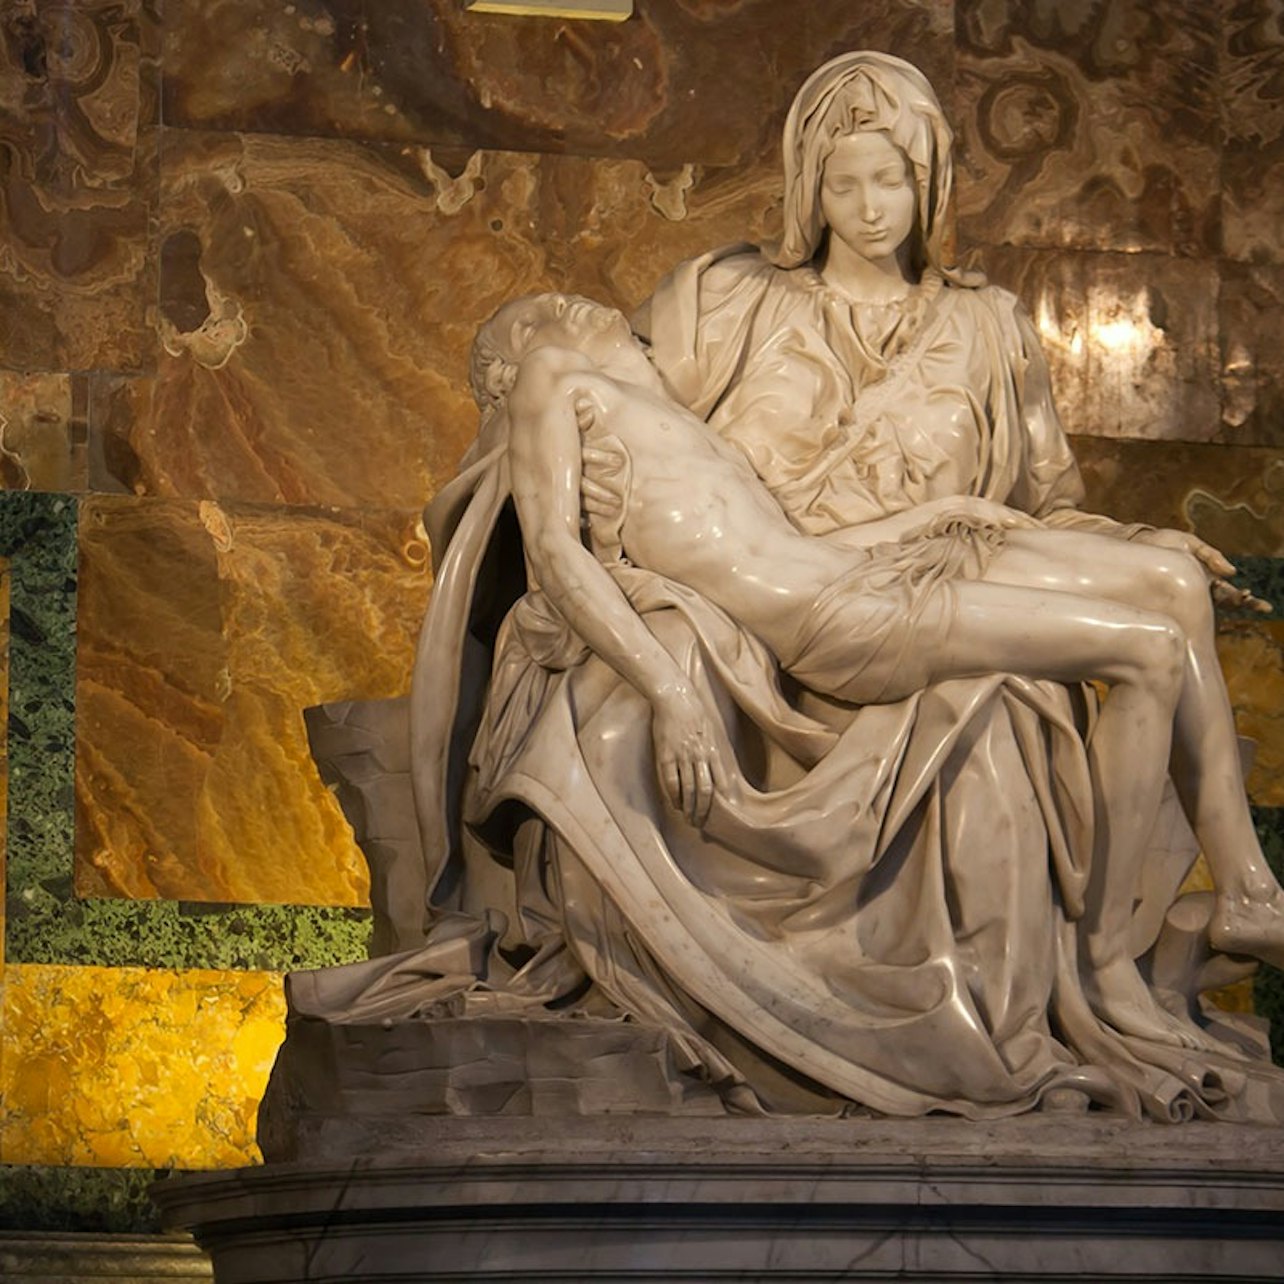 St. Peter's Basilica: Guided Tour - Accommodations in Rome